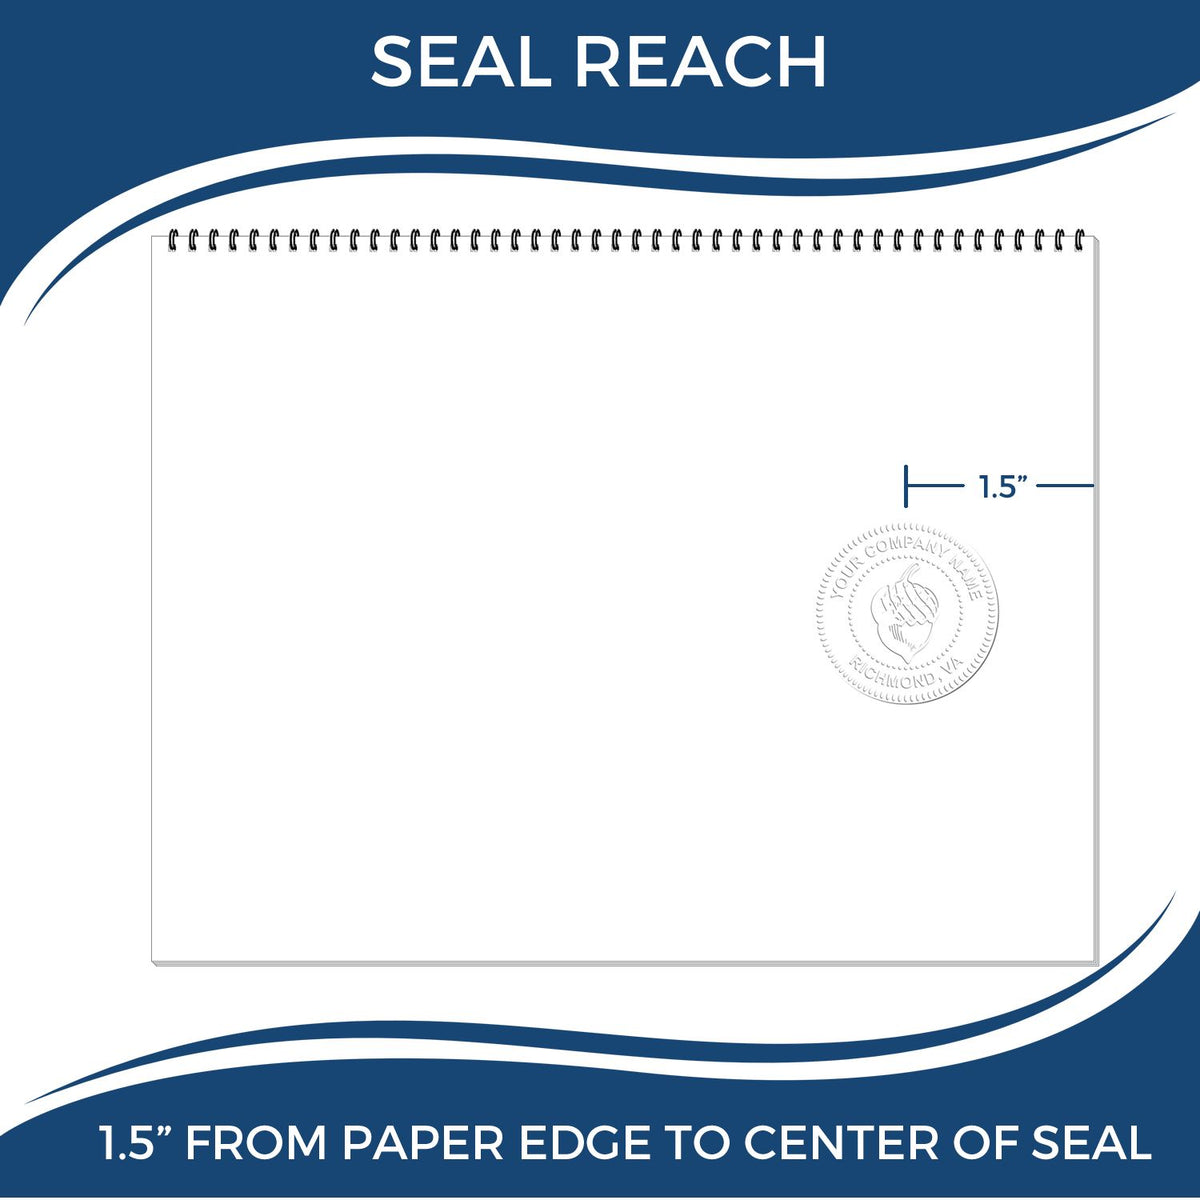 An infographic showing the seal reach which is represented by a ruler and a miniature seal image of the Gift Maine Engineer Seal